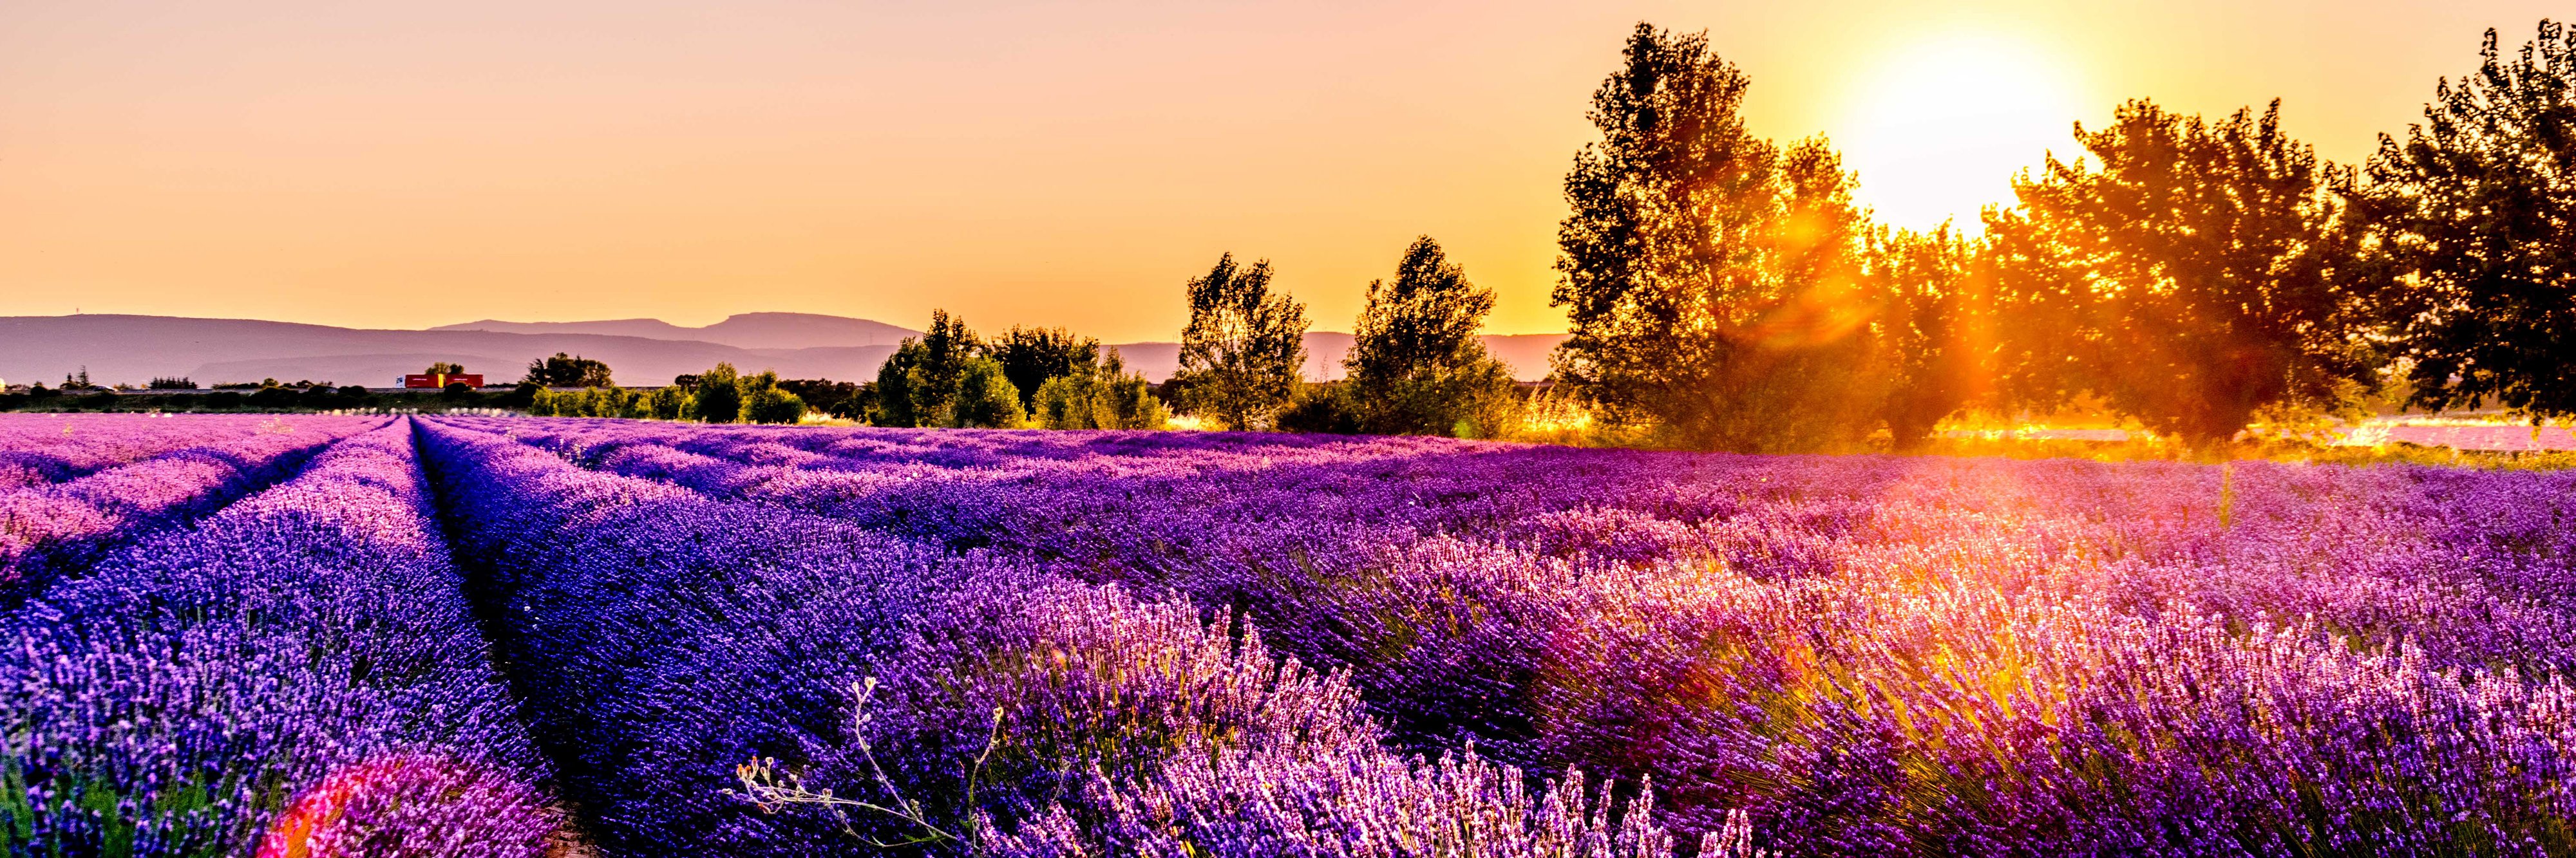 Sunset over a lavender field in Drôme, France